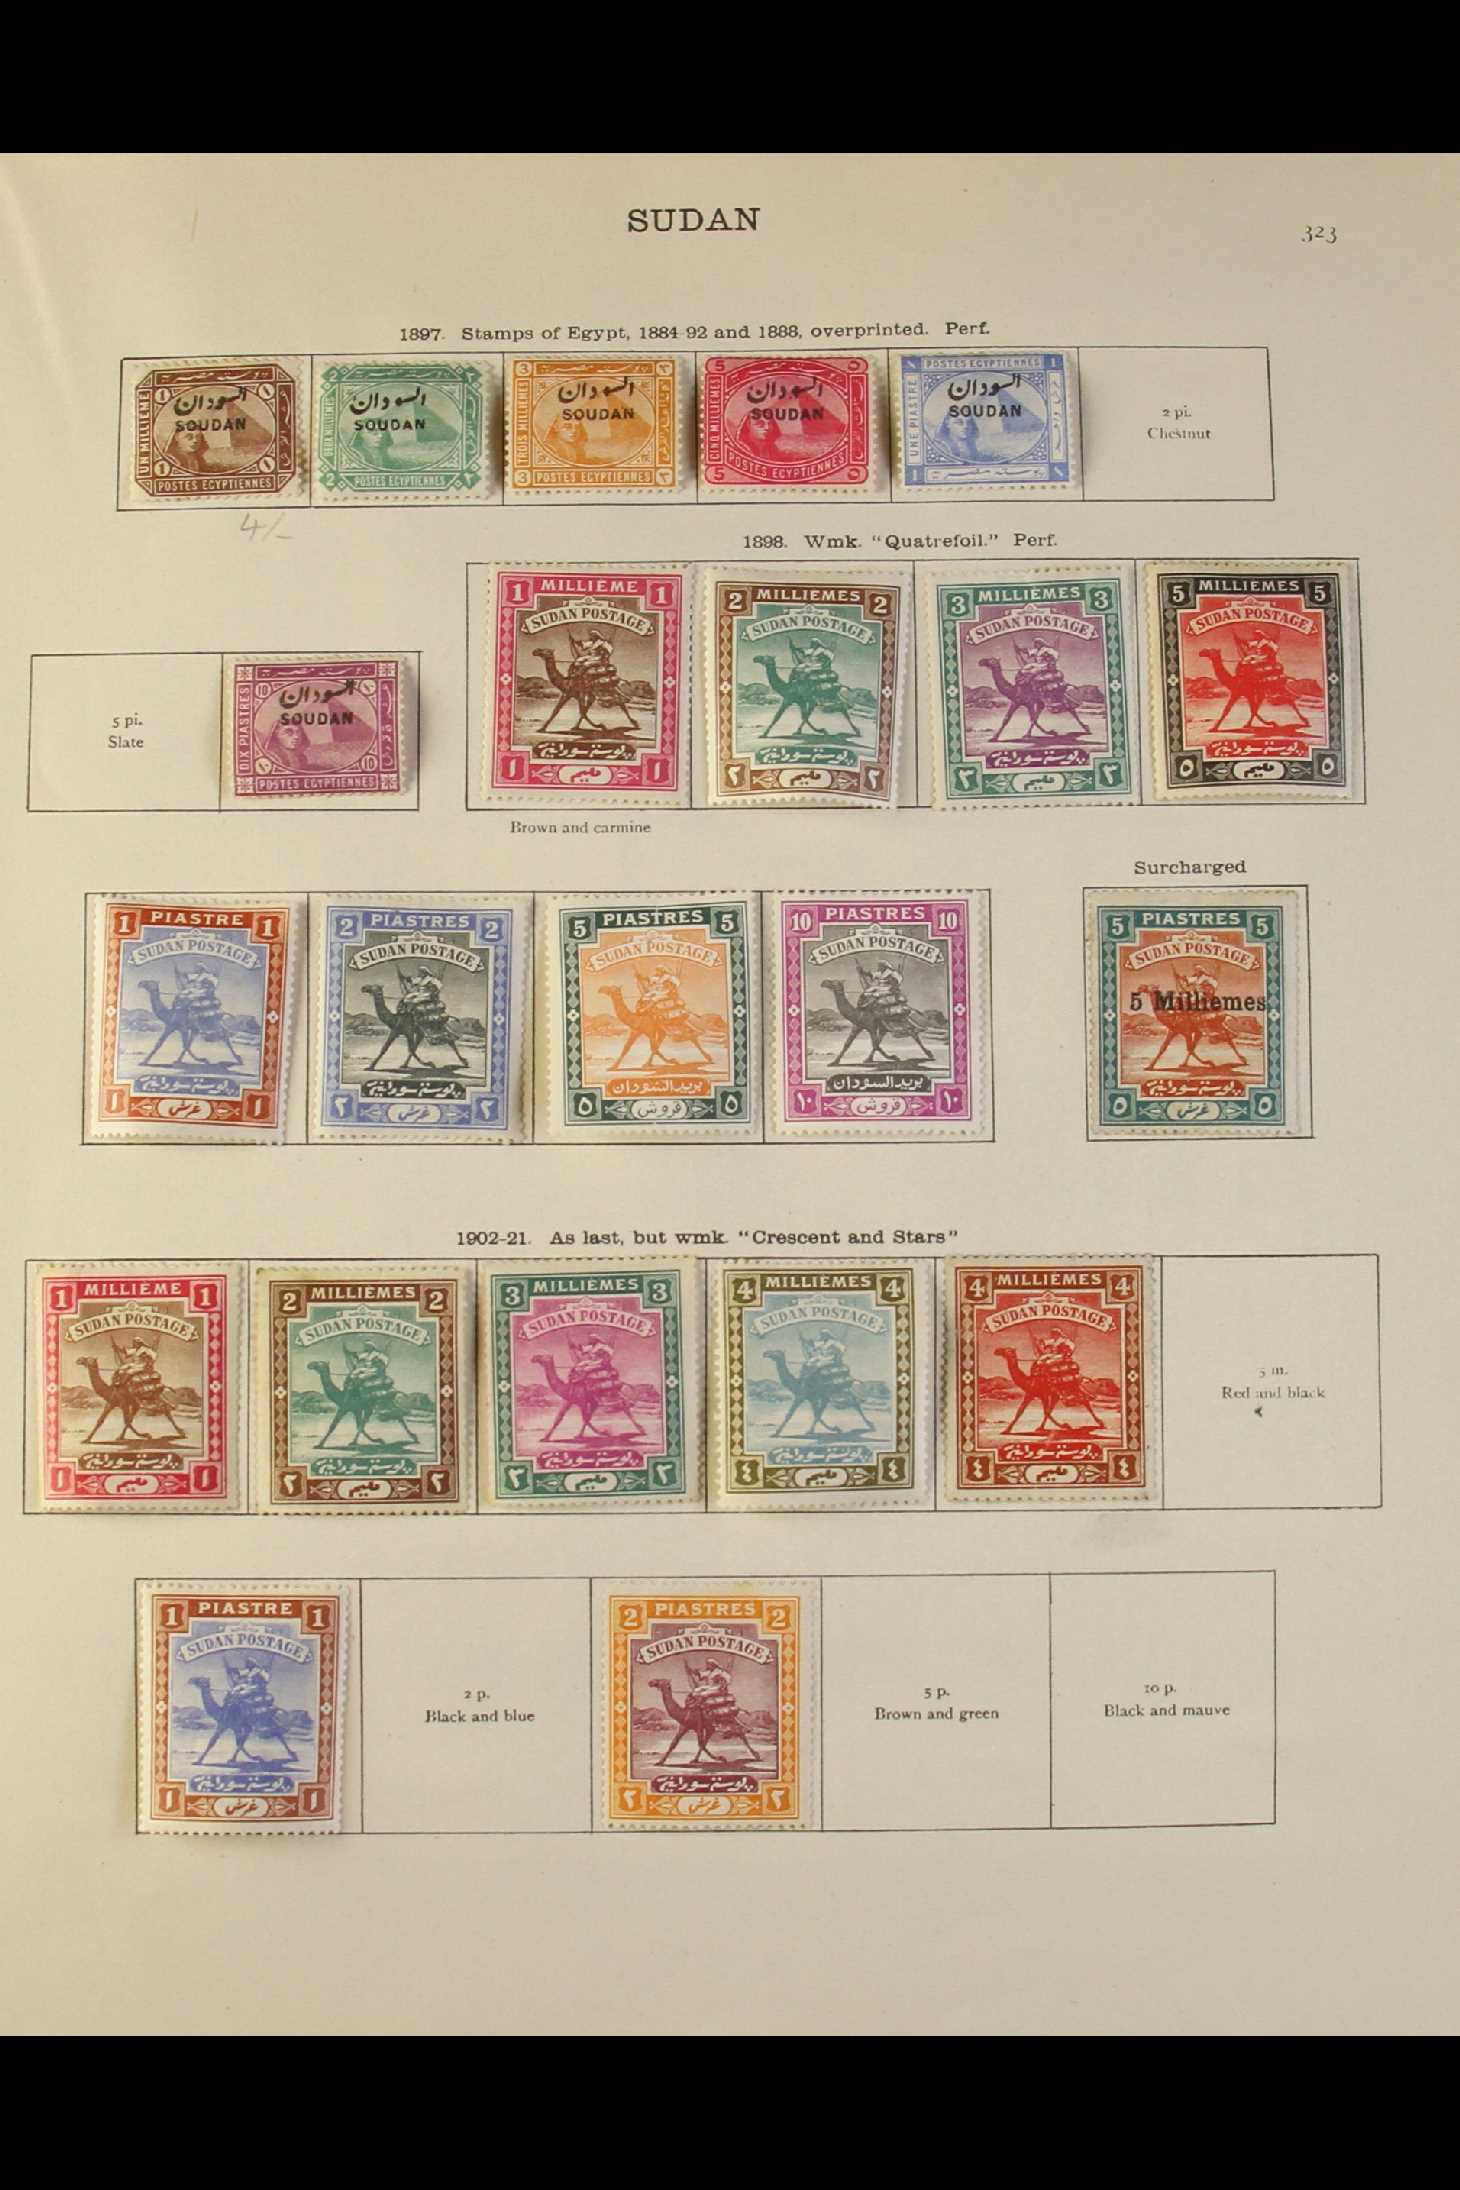 SUDAN 1897 - 1935 MINT COLLECTION on SG "New Ideal" album pages, 1897 most vals to 10pi, 1898 Arab